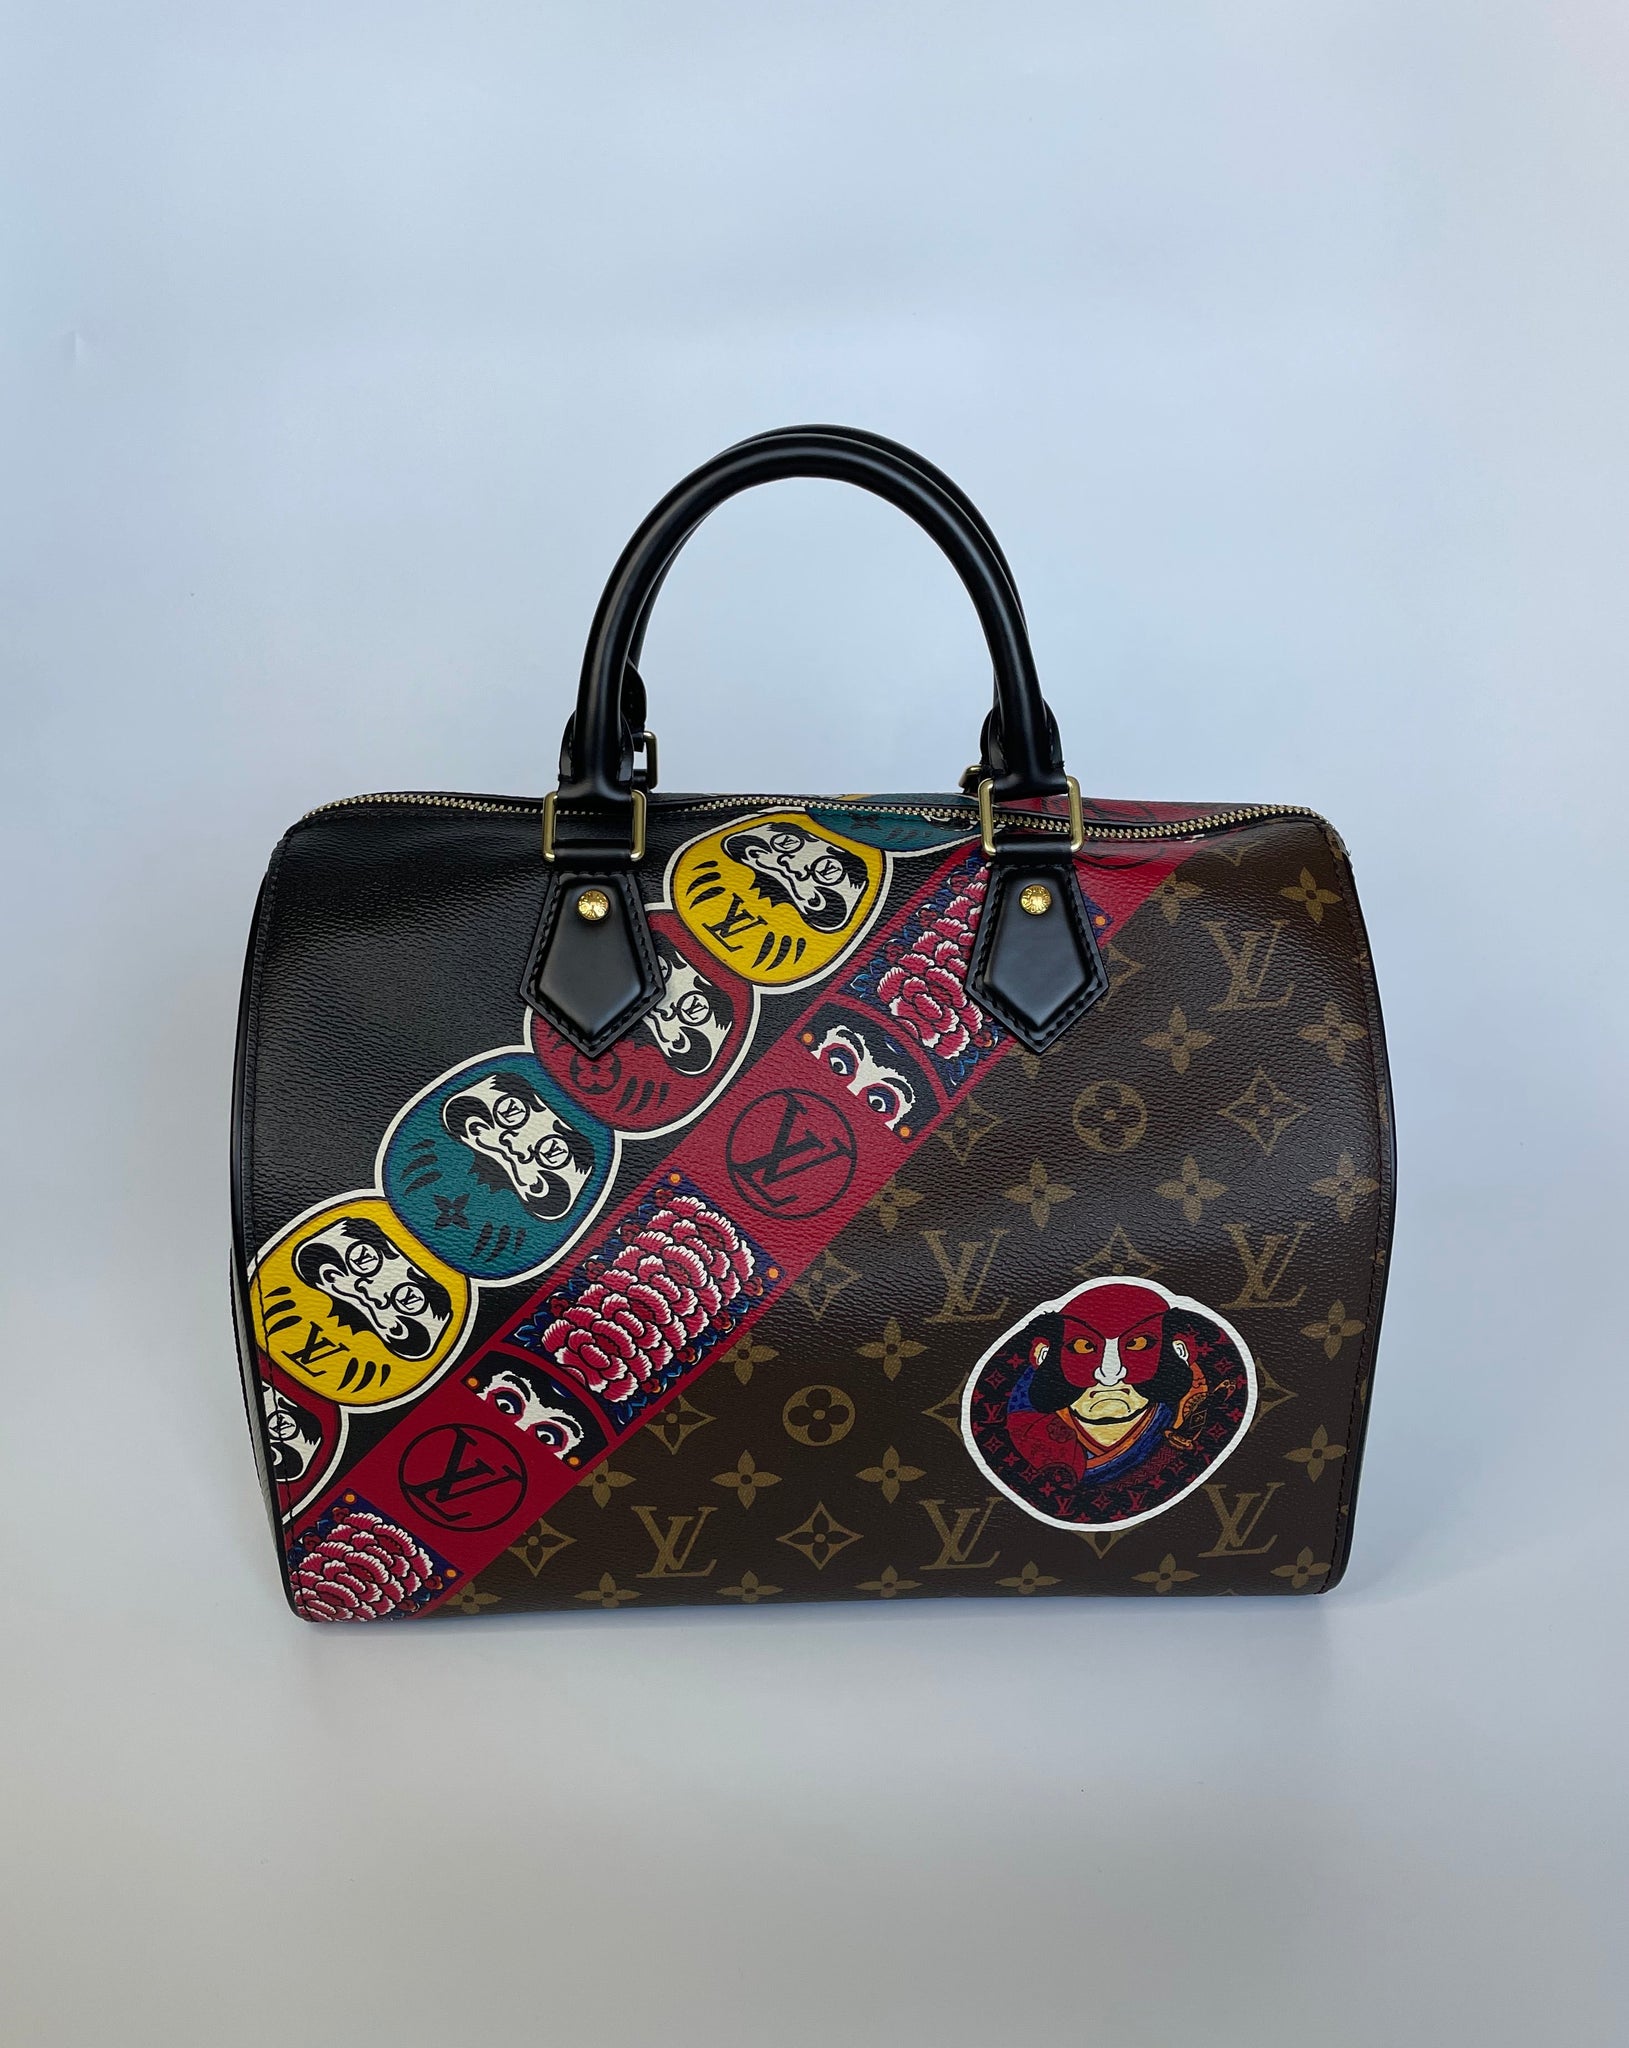 Louis Vuitton Limited Edition Speedy 30 Camouflage We all have our